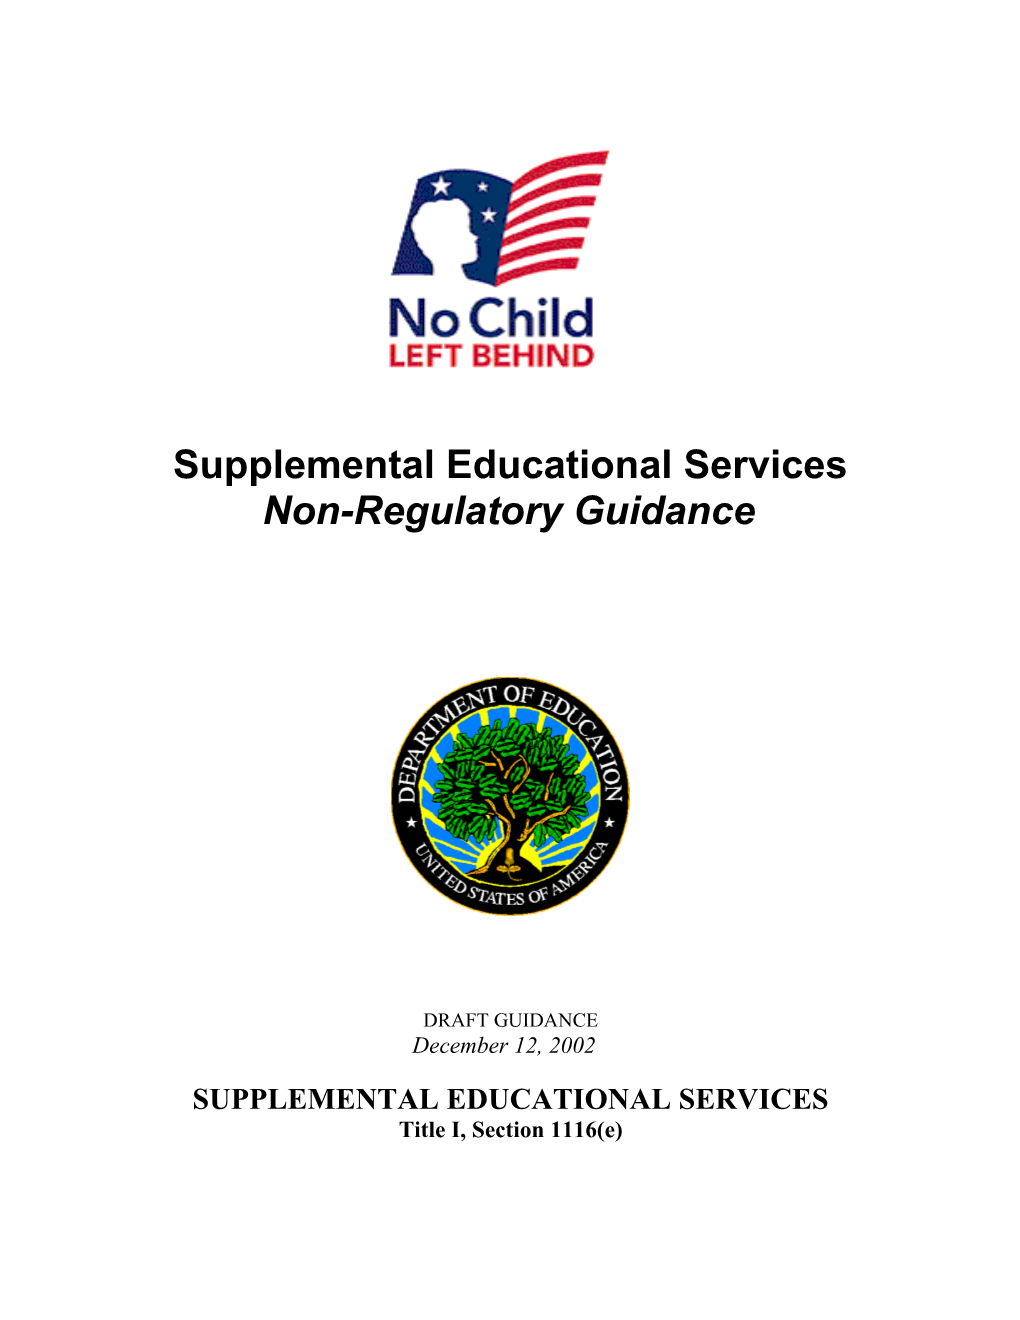 Title I, Section 1116(E): Supplemental Educational Services Draft Guidance December 12